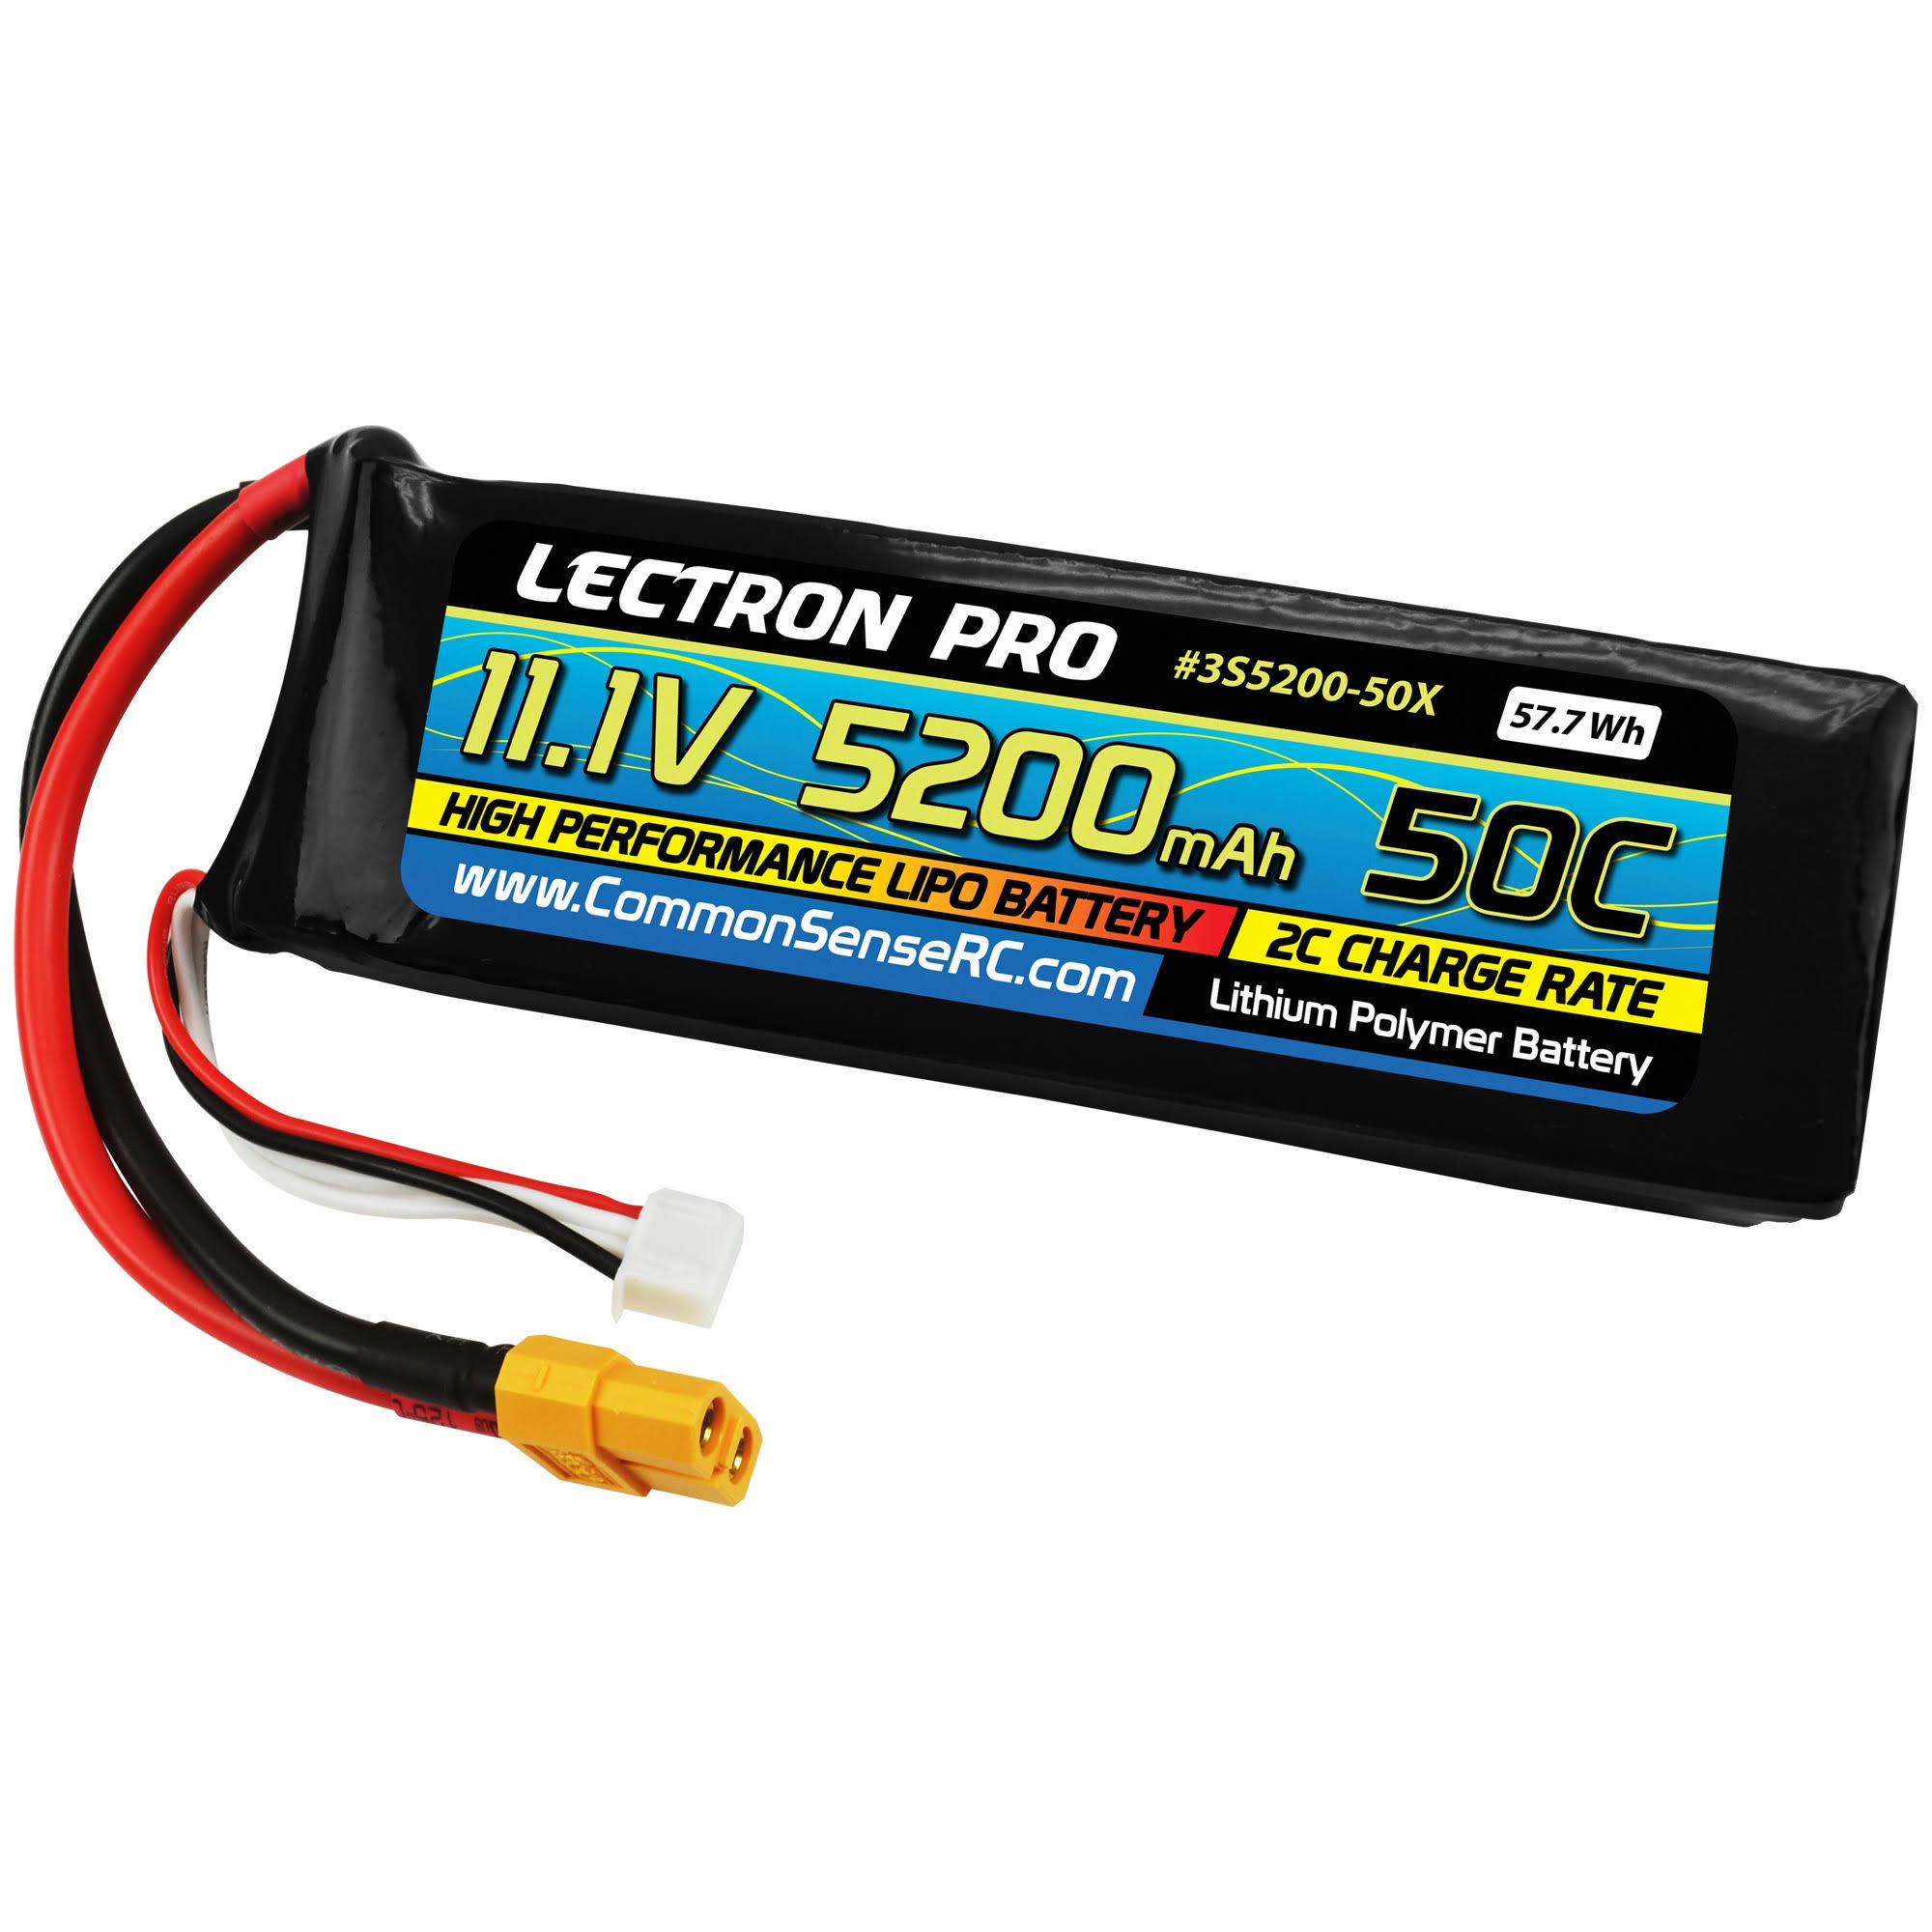 Lectron Pro 11.1V 5200mAh 50C Lipo Battery with XT60 Connector